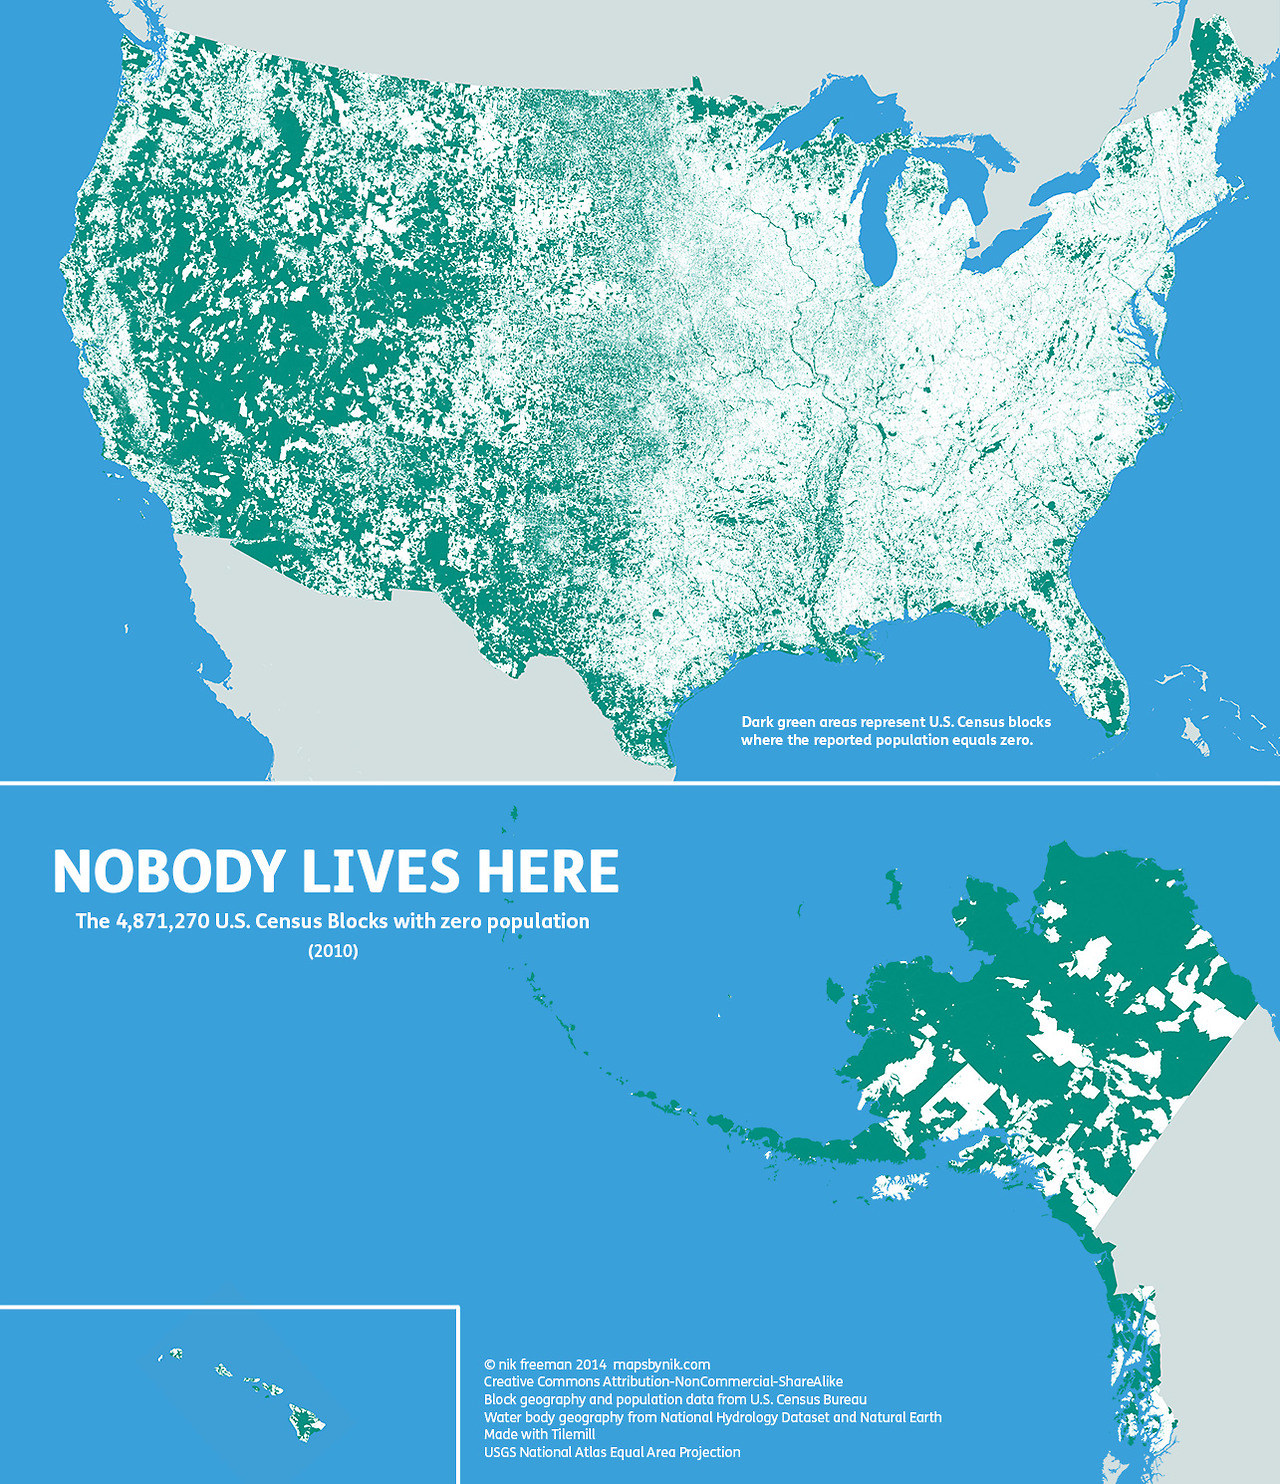 The areas in green have 0 population